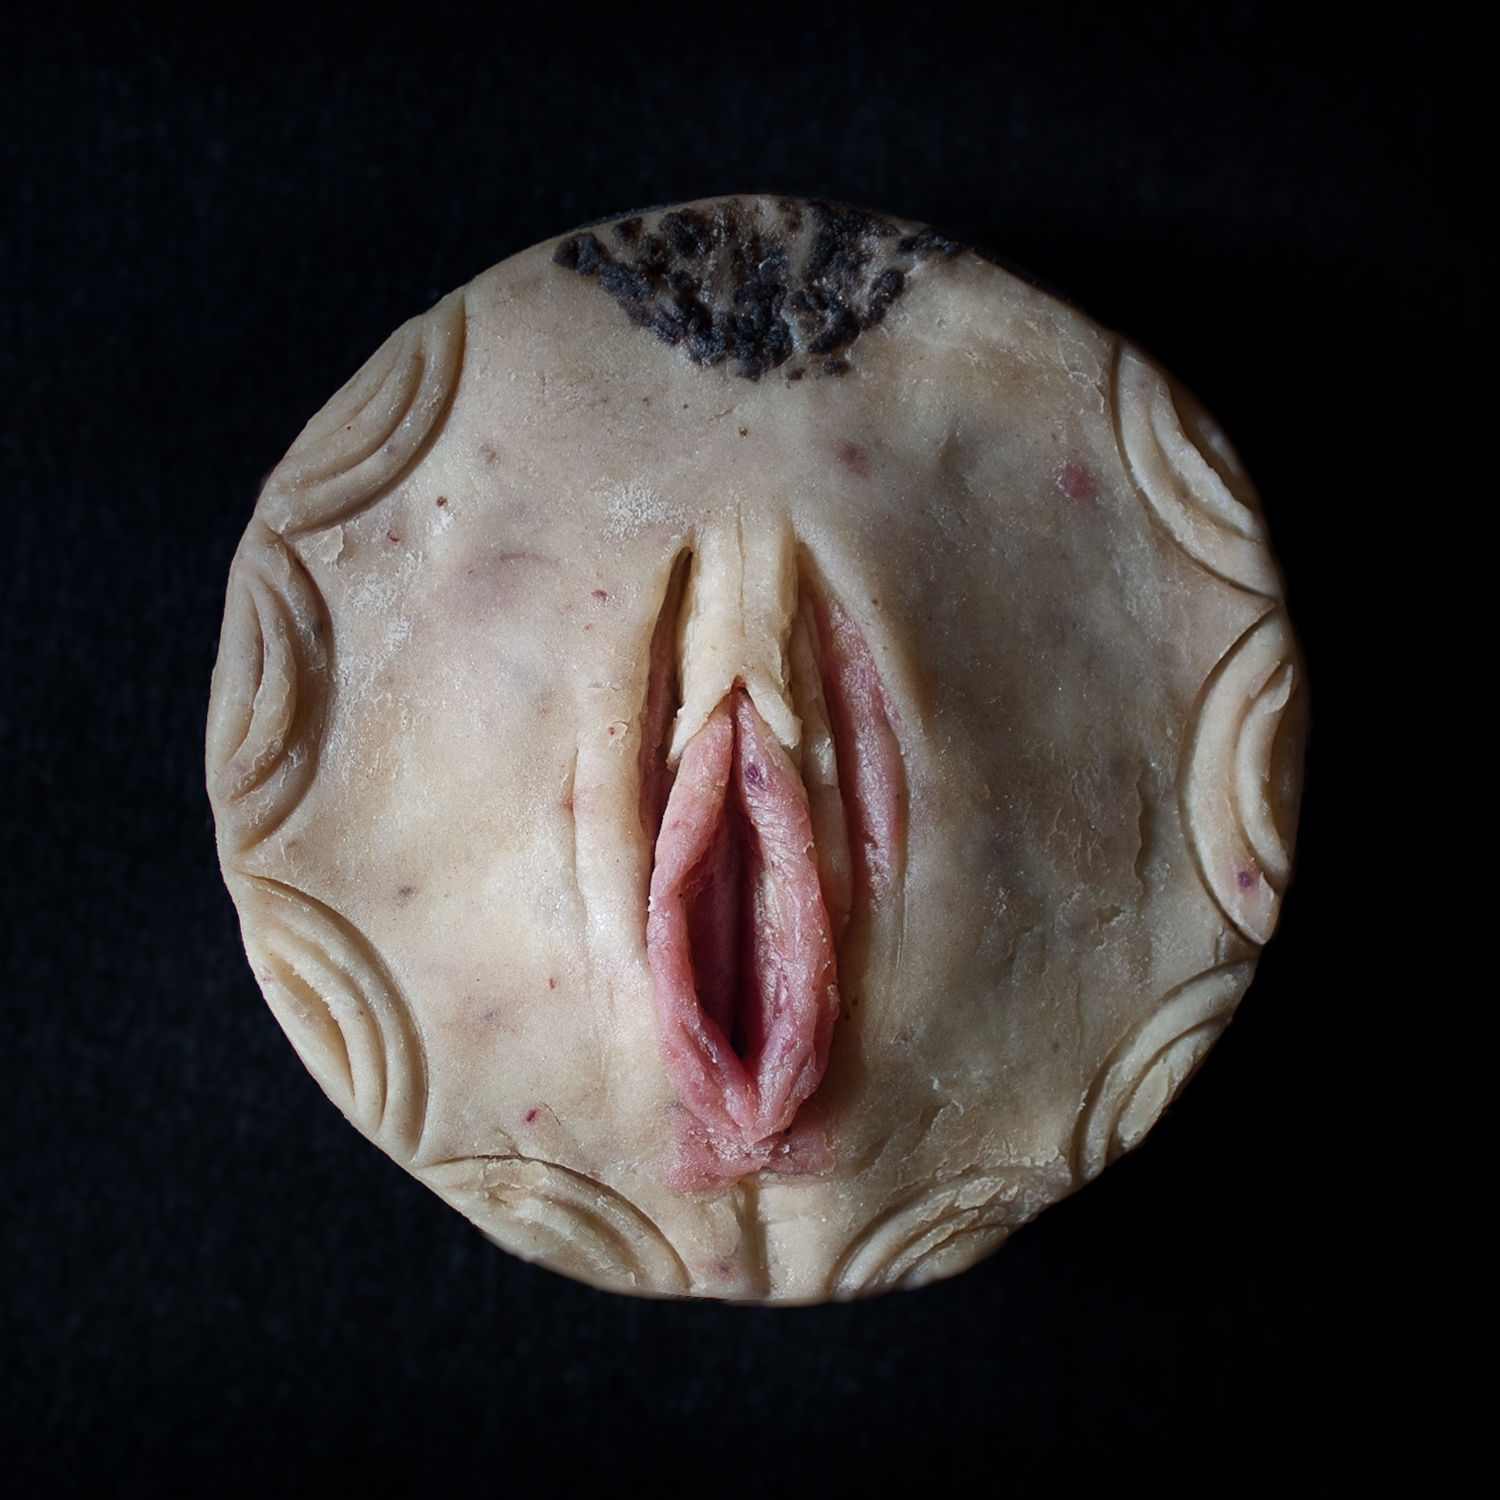 Real pie crust with pie art that looks like a vulva with pink inner labia and a small amount of pubic hair above the clitoral hood.
